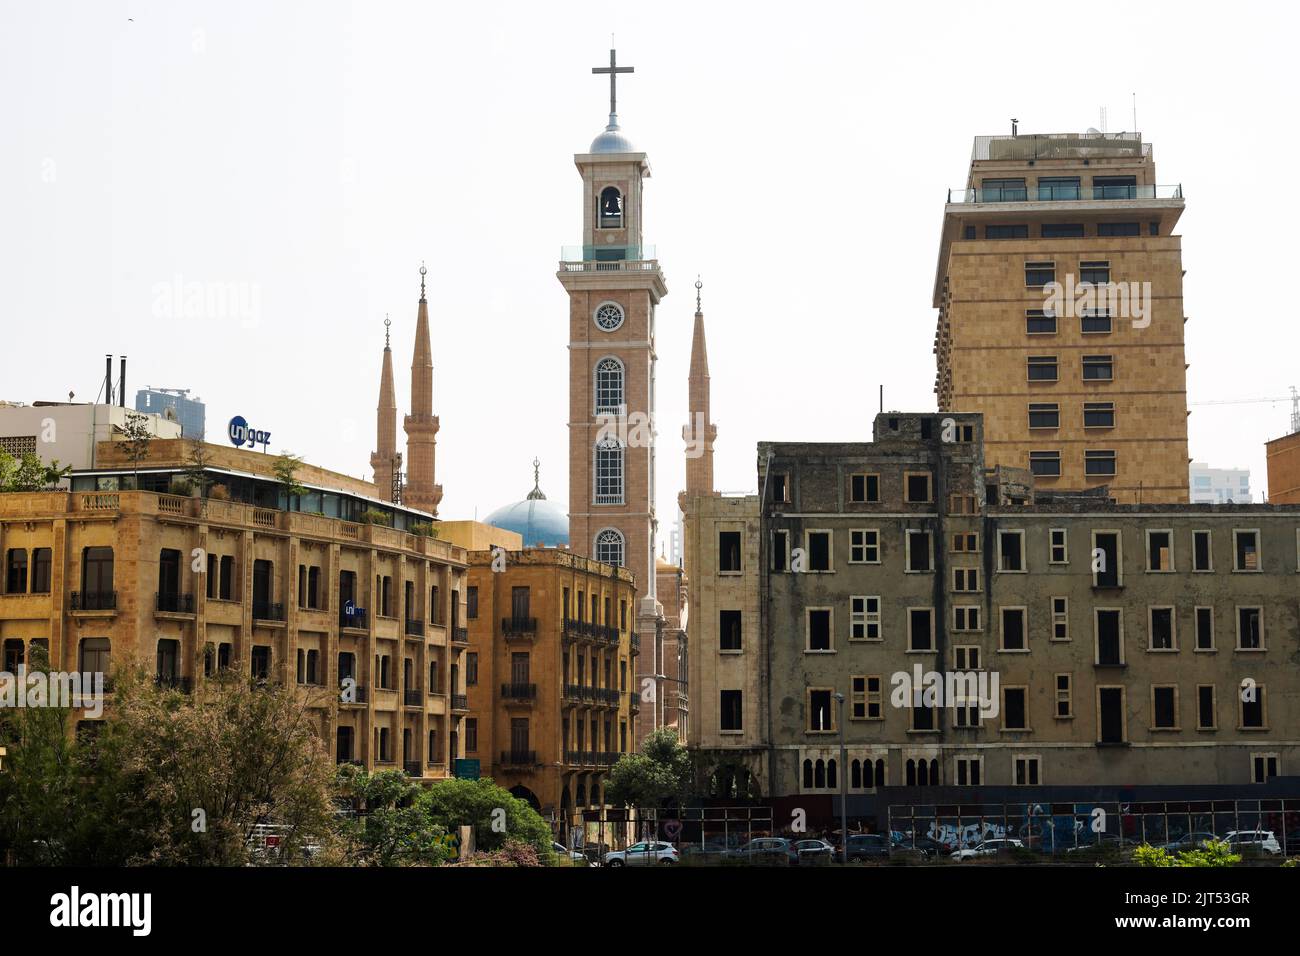 Beirut, Lebanon: Bell Tower of St. George Cathedral and the minarets of Mohammad Al-Amin Sunni Muslim Mosque (also called Blue Mosque) Stock Photo